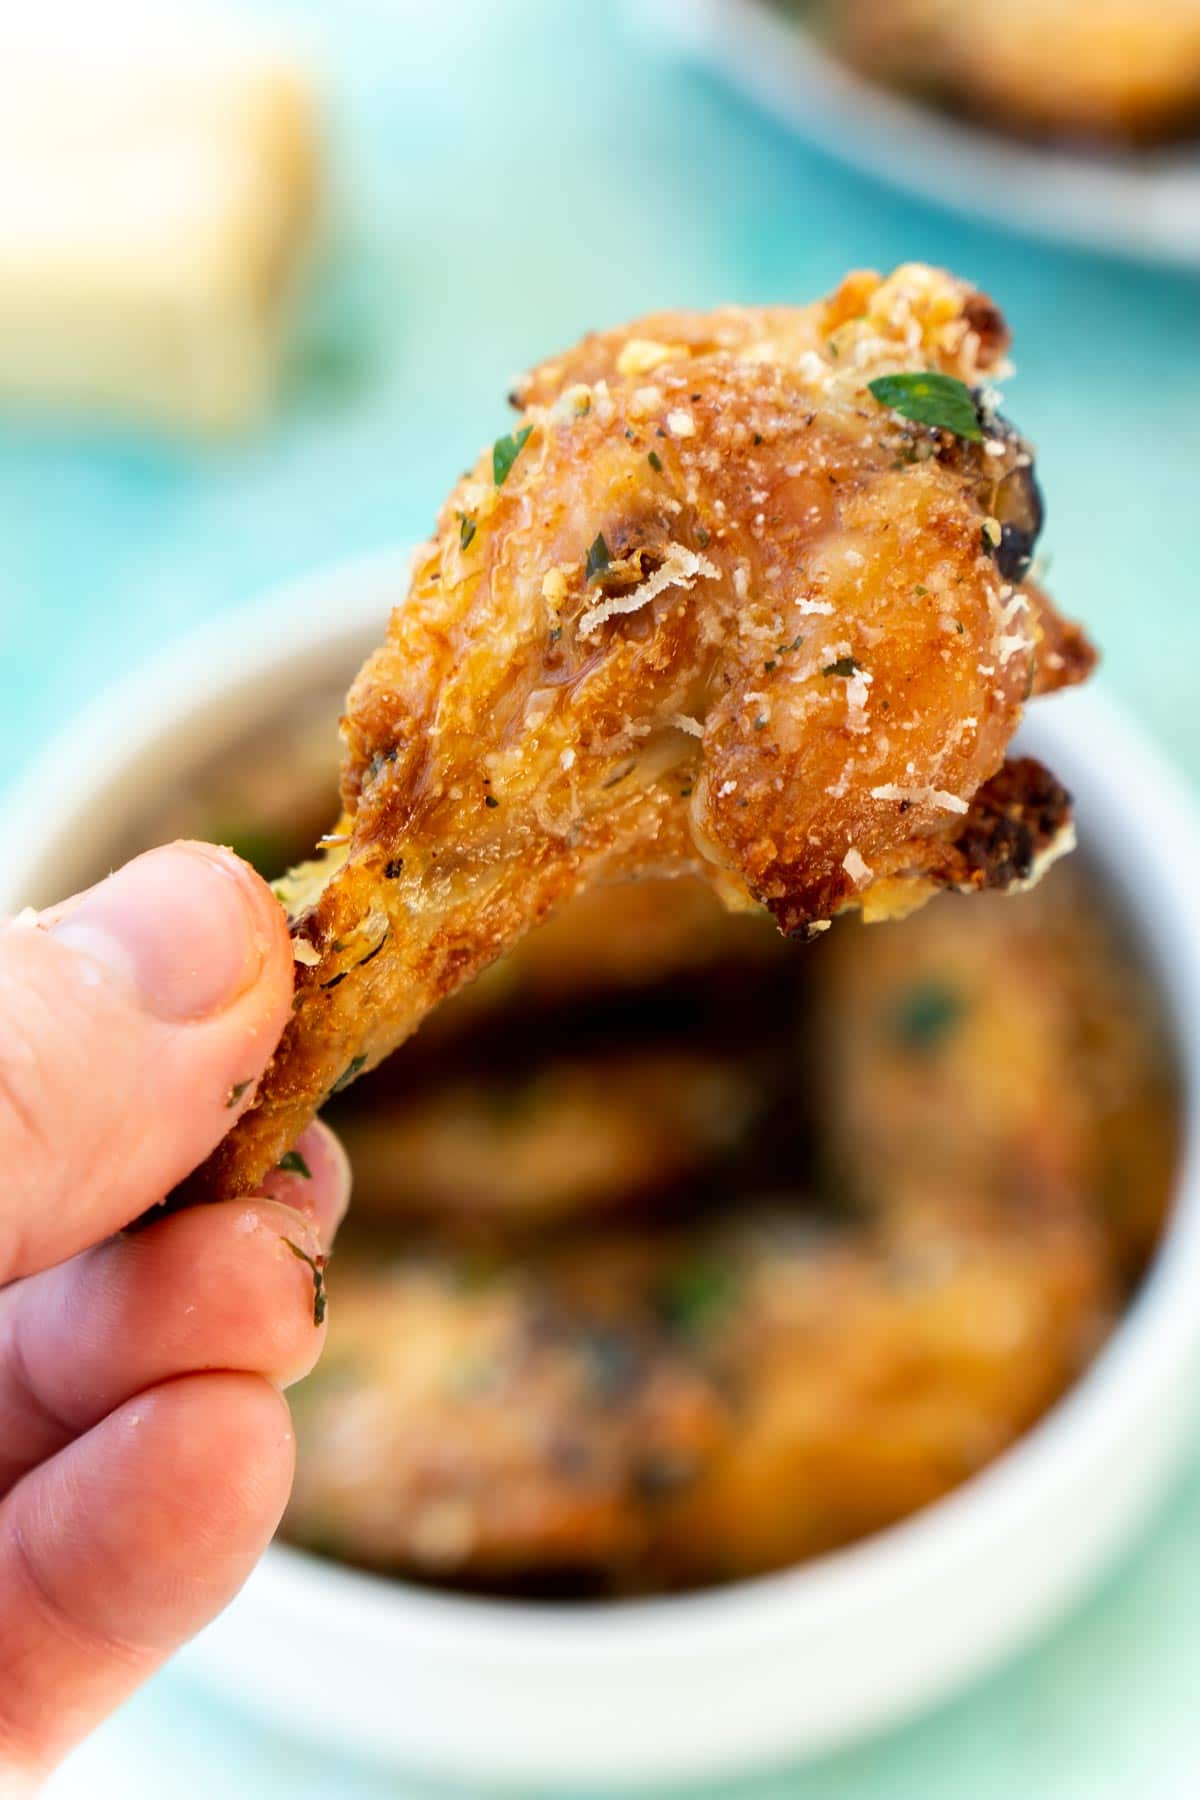 Hand holding one wing with a bowl of garlic parmesan wings in the background